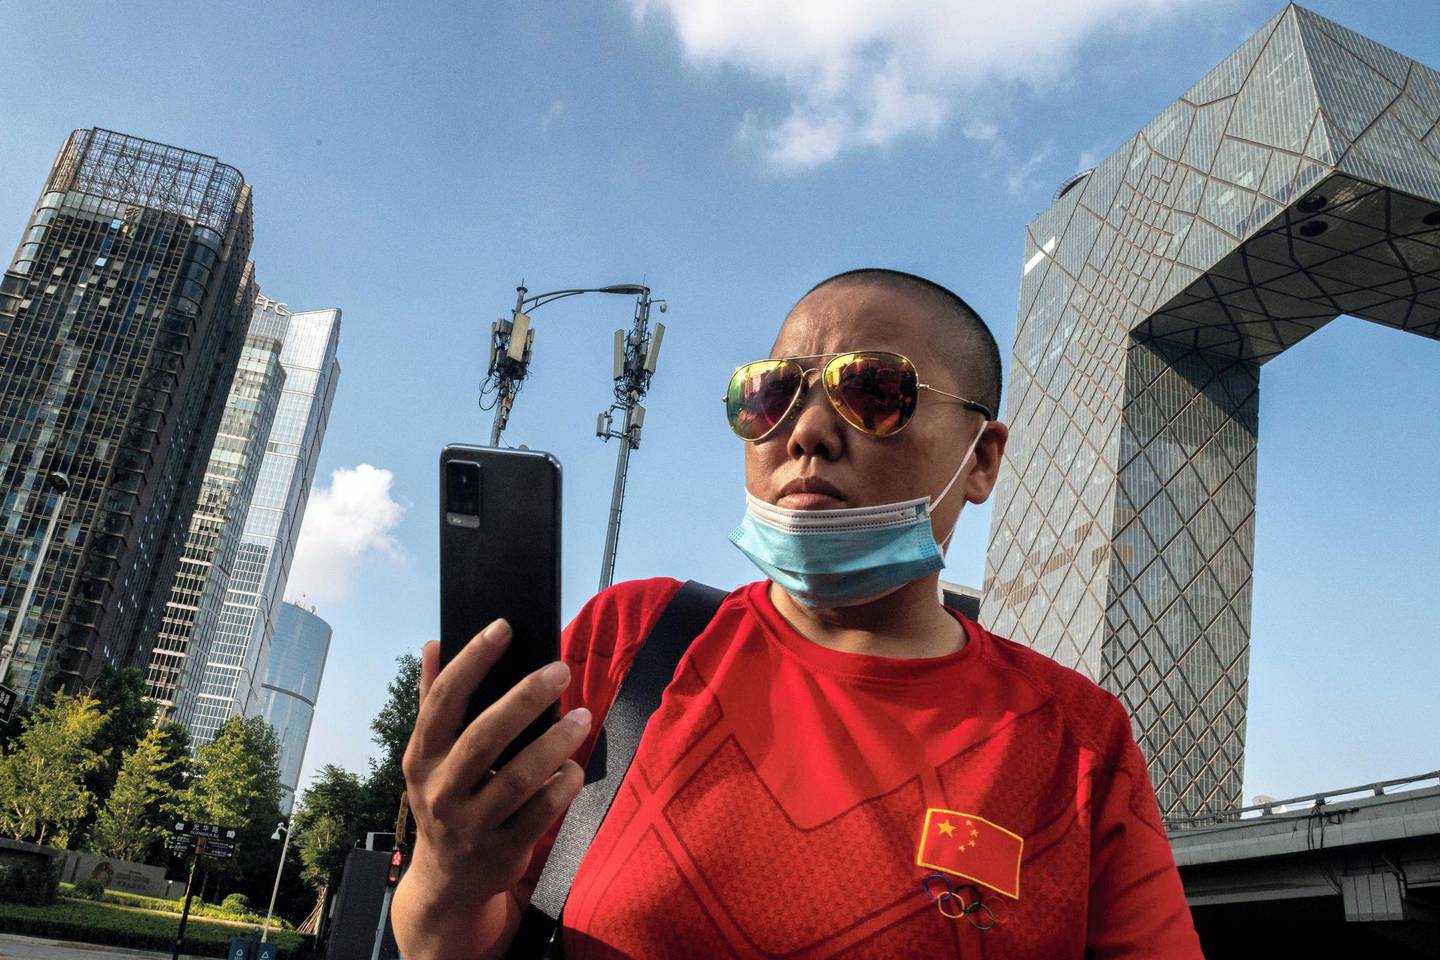 A woman checks her smartphone as she walks before two cellphone towers (back C), used for a 5G network, on a street in Beijing on September 24, 2020. (Photo by NICOLAS ASFOURI / AFP)